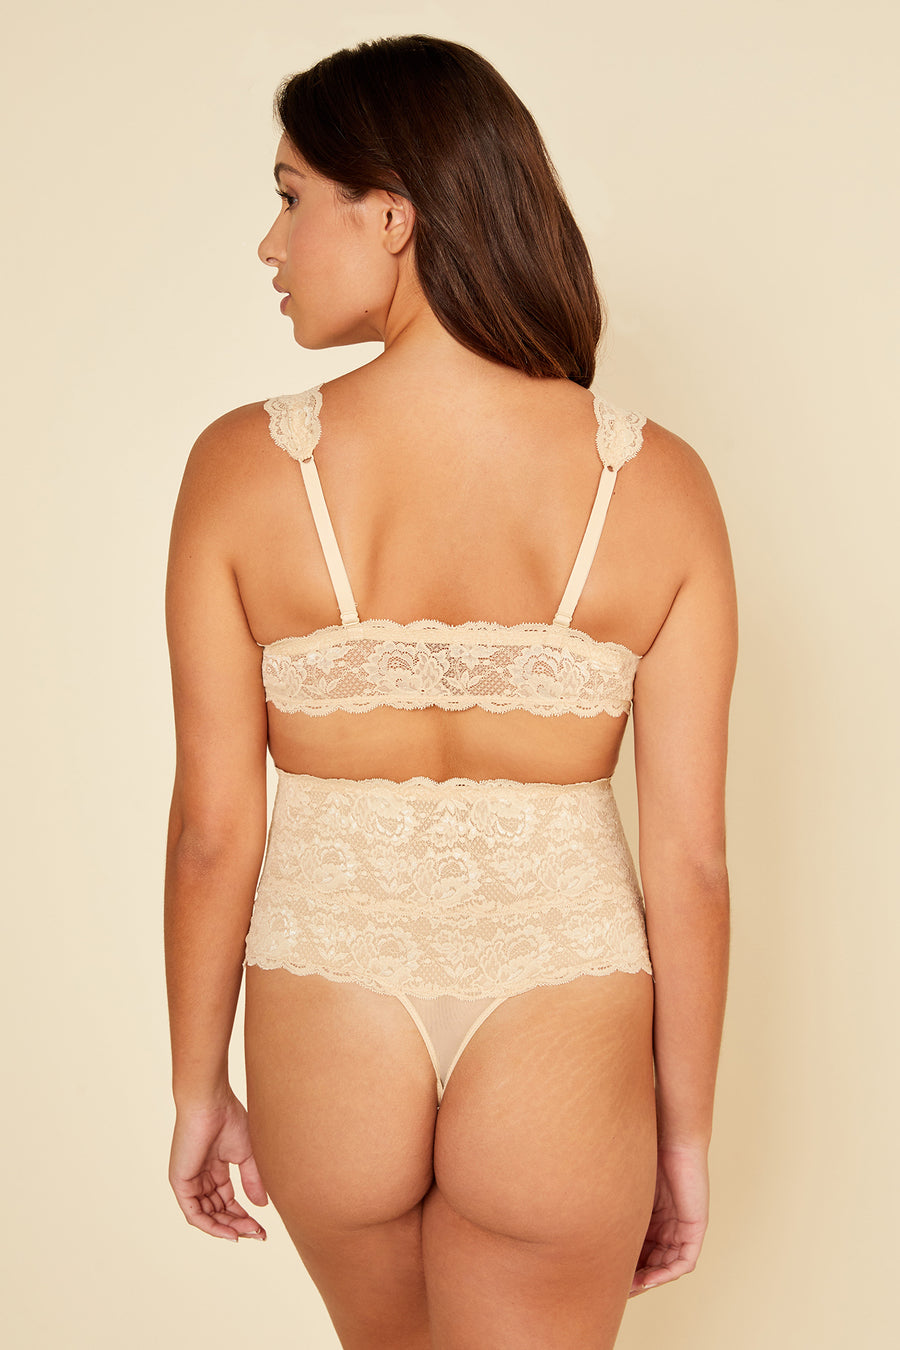 Beige Thong - Never Say Never Sexy High Waist Thong Shapewear